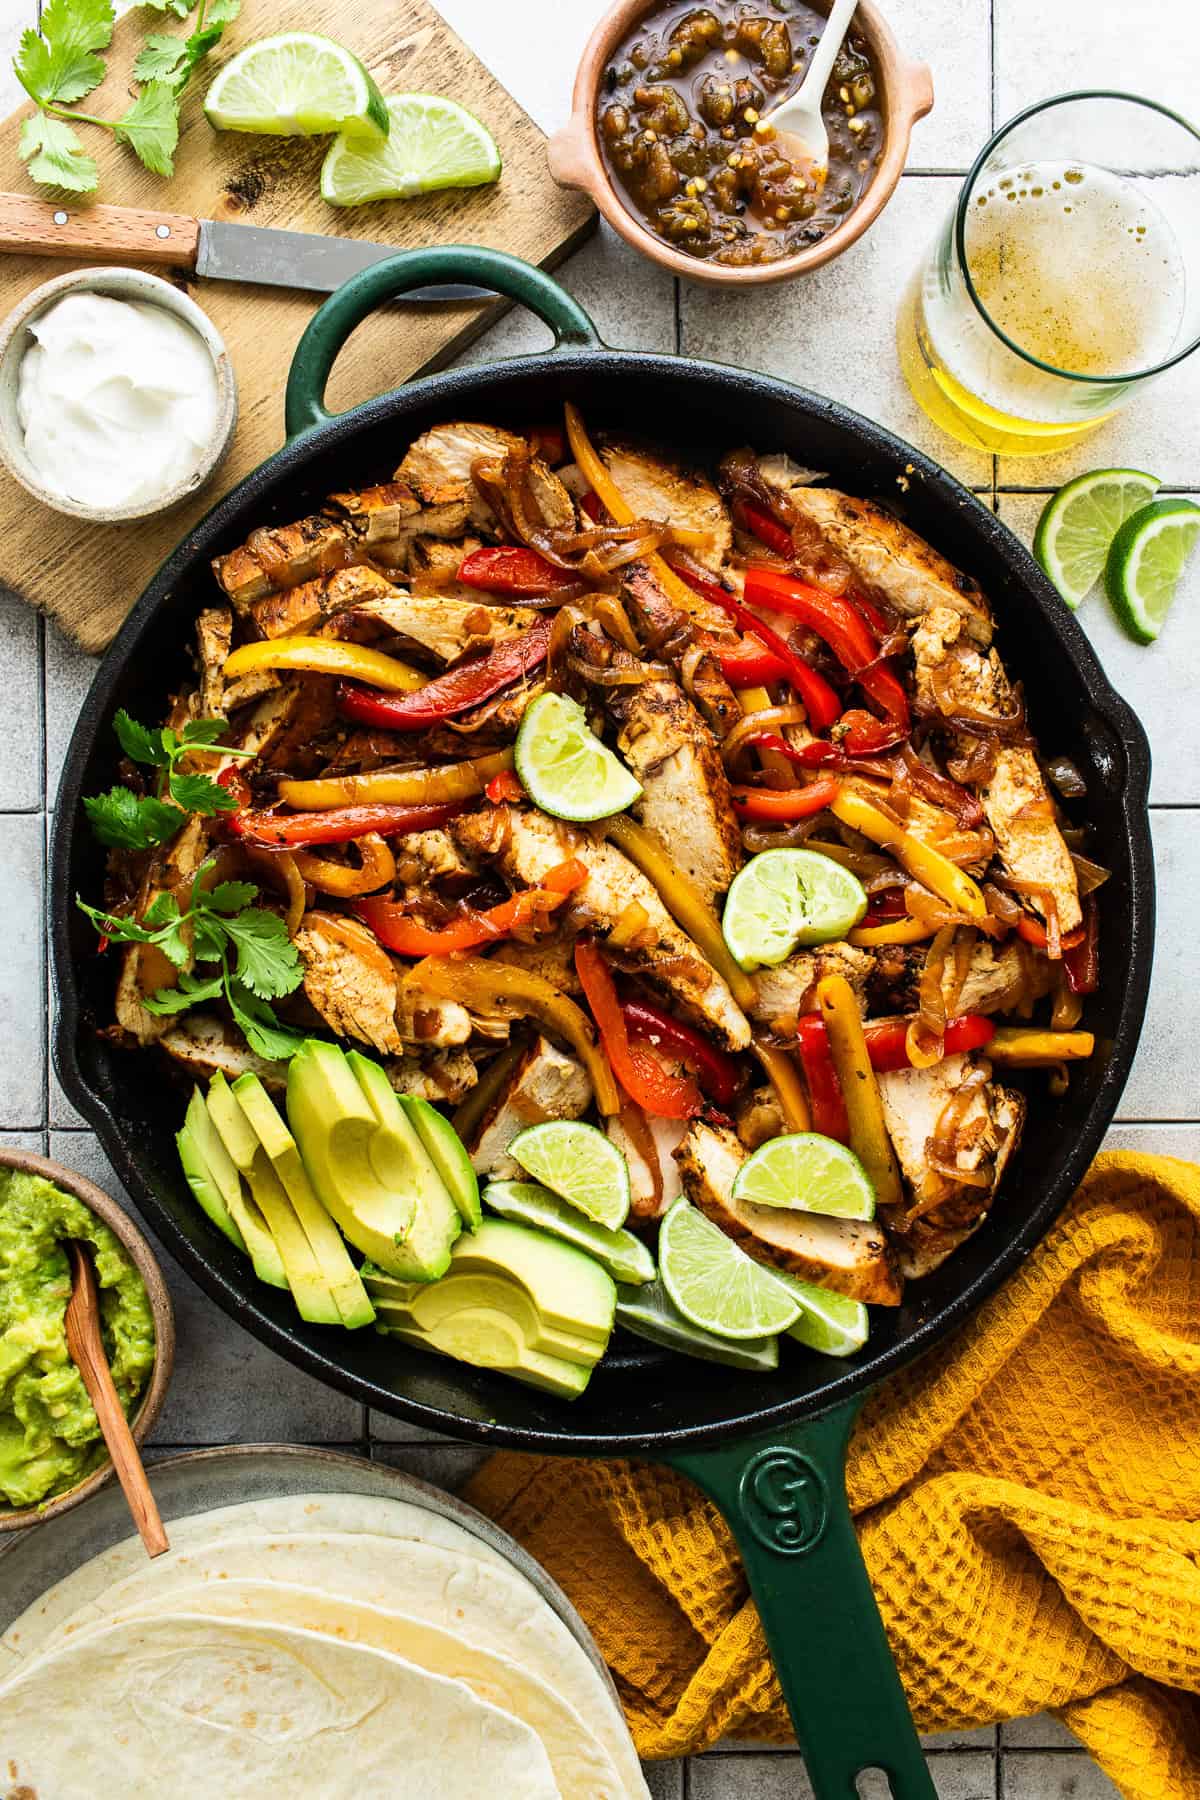 Pan-fried chicken fajitas topped with lime, cilantro and avocado.